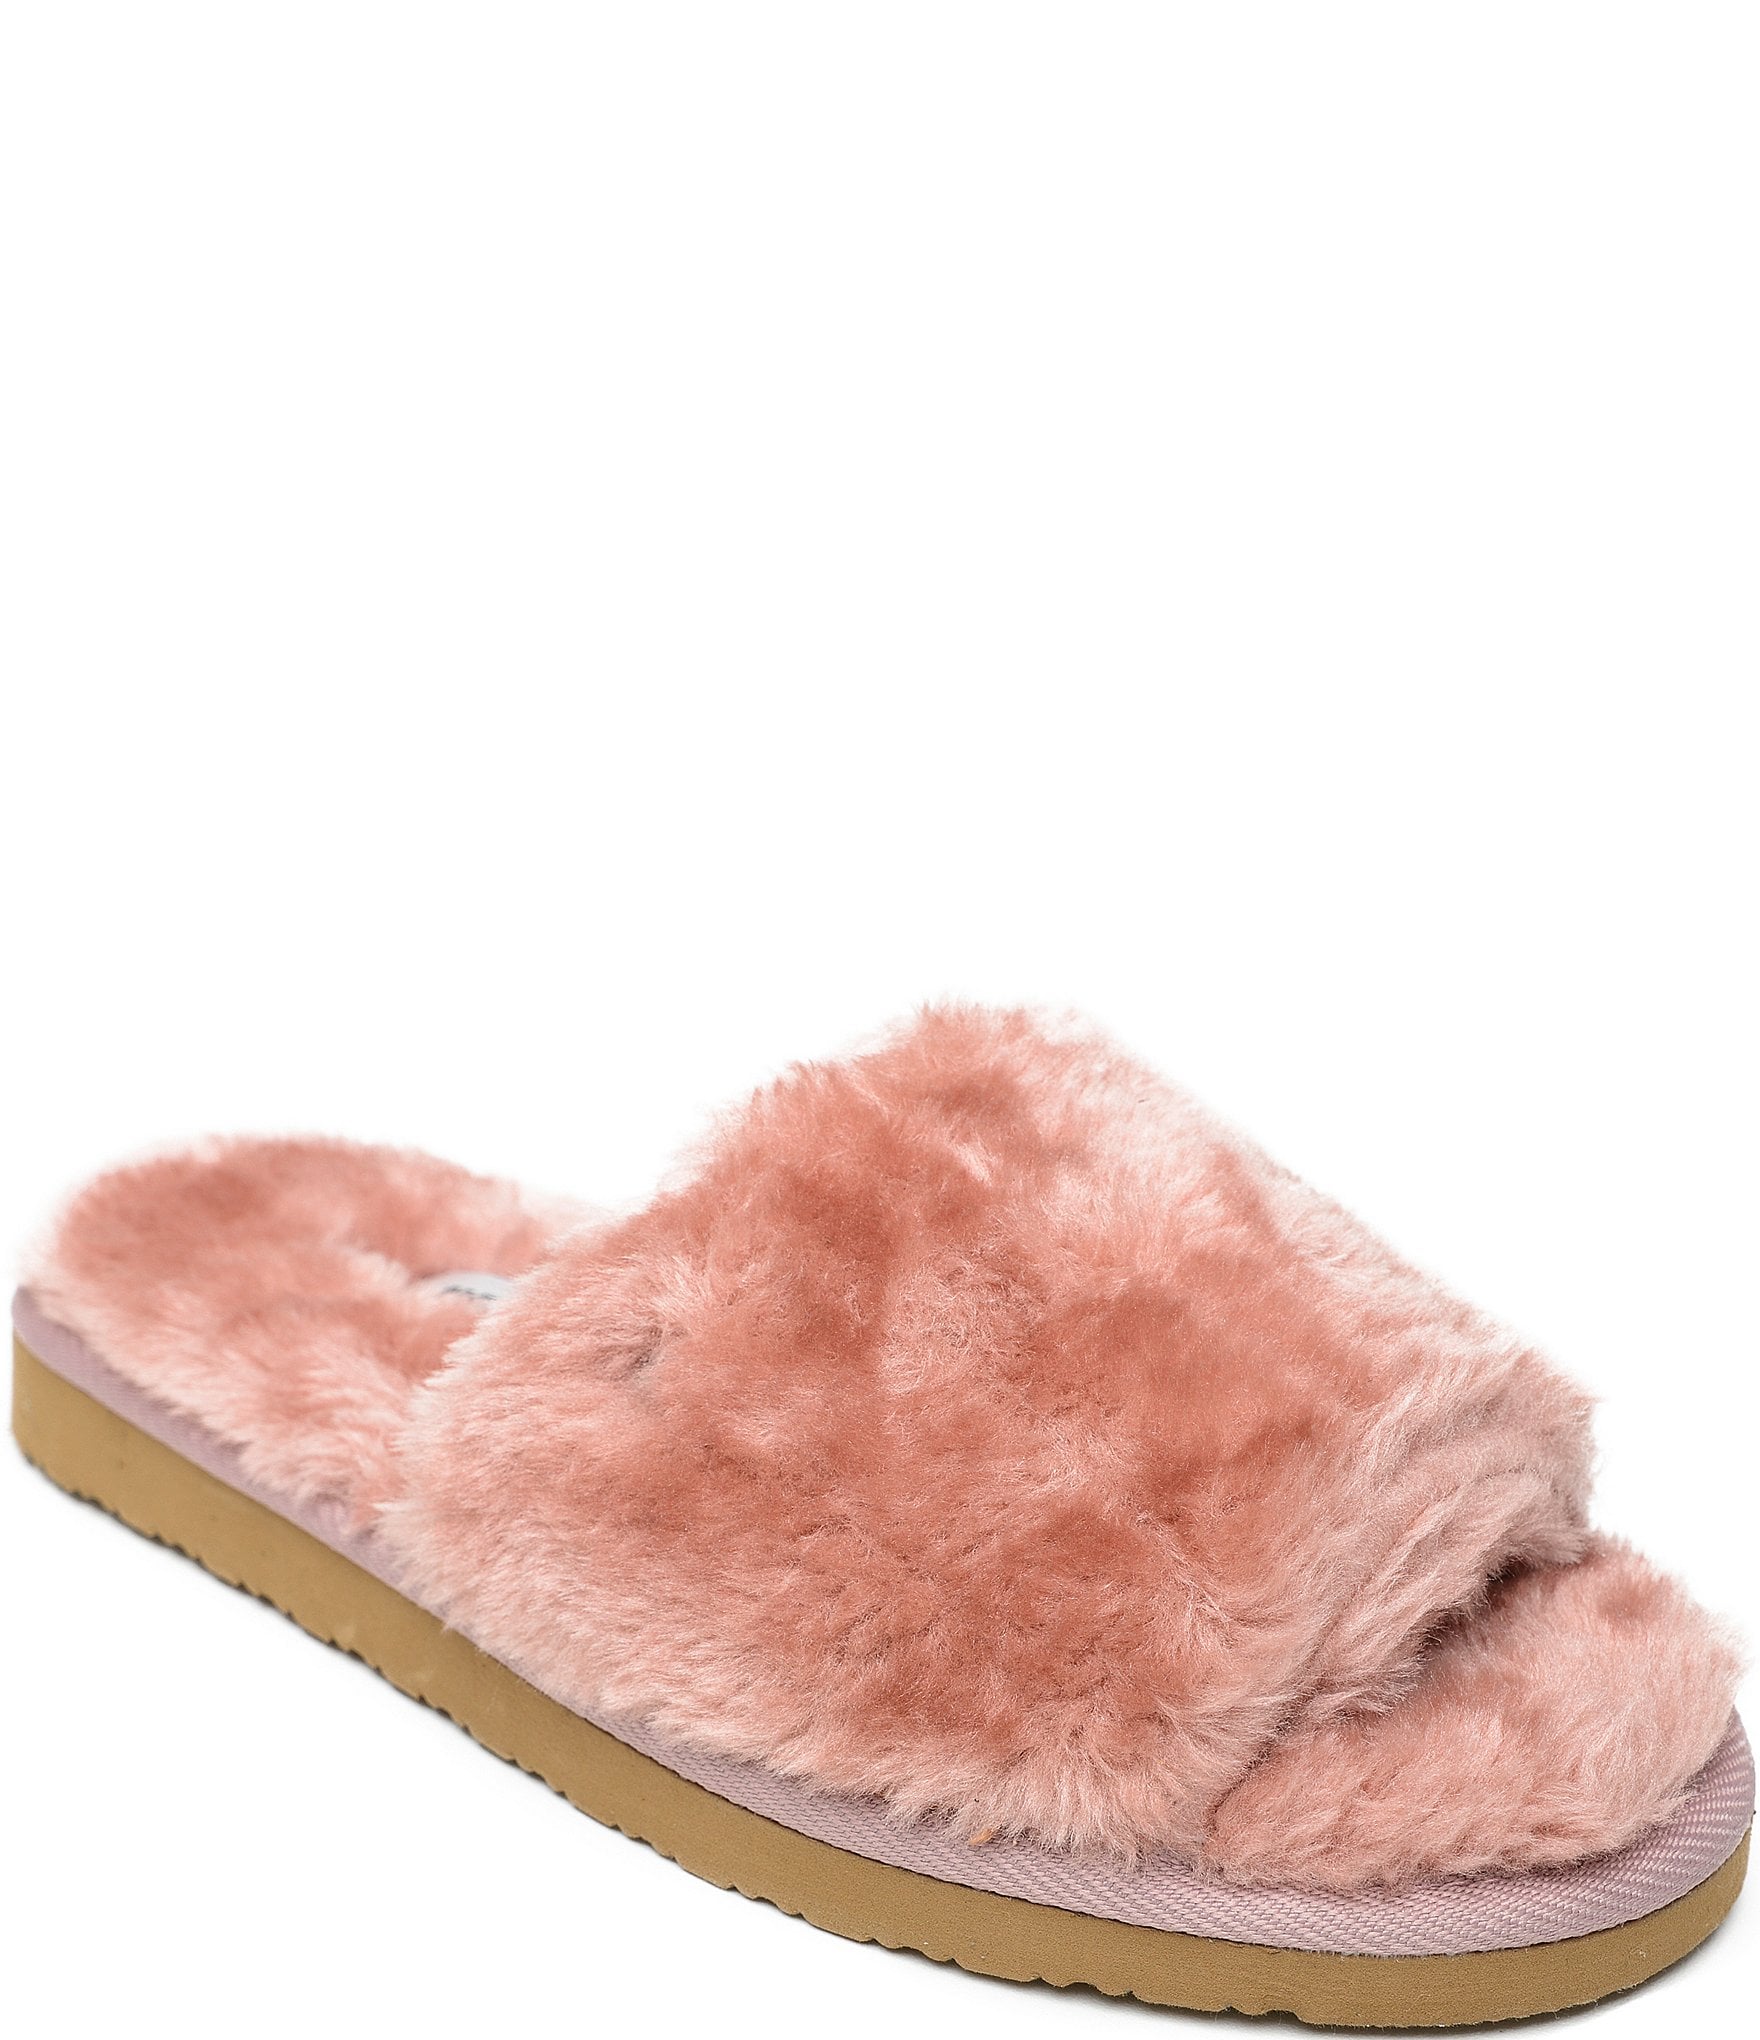 Pink Slippers – buy online or call 01206 843461